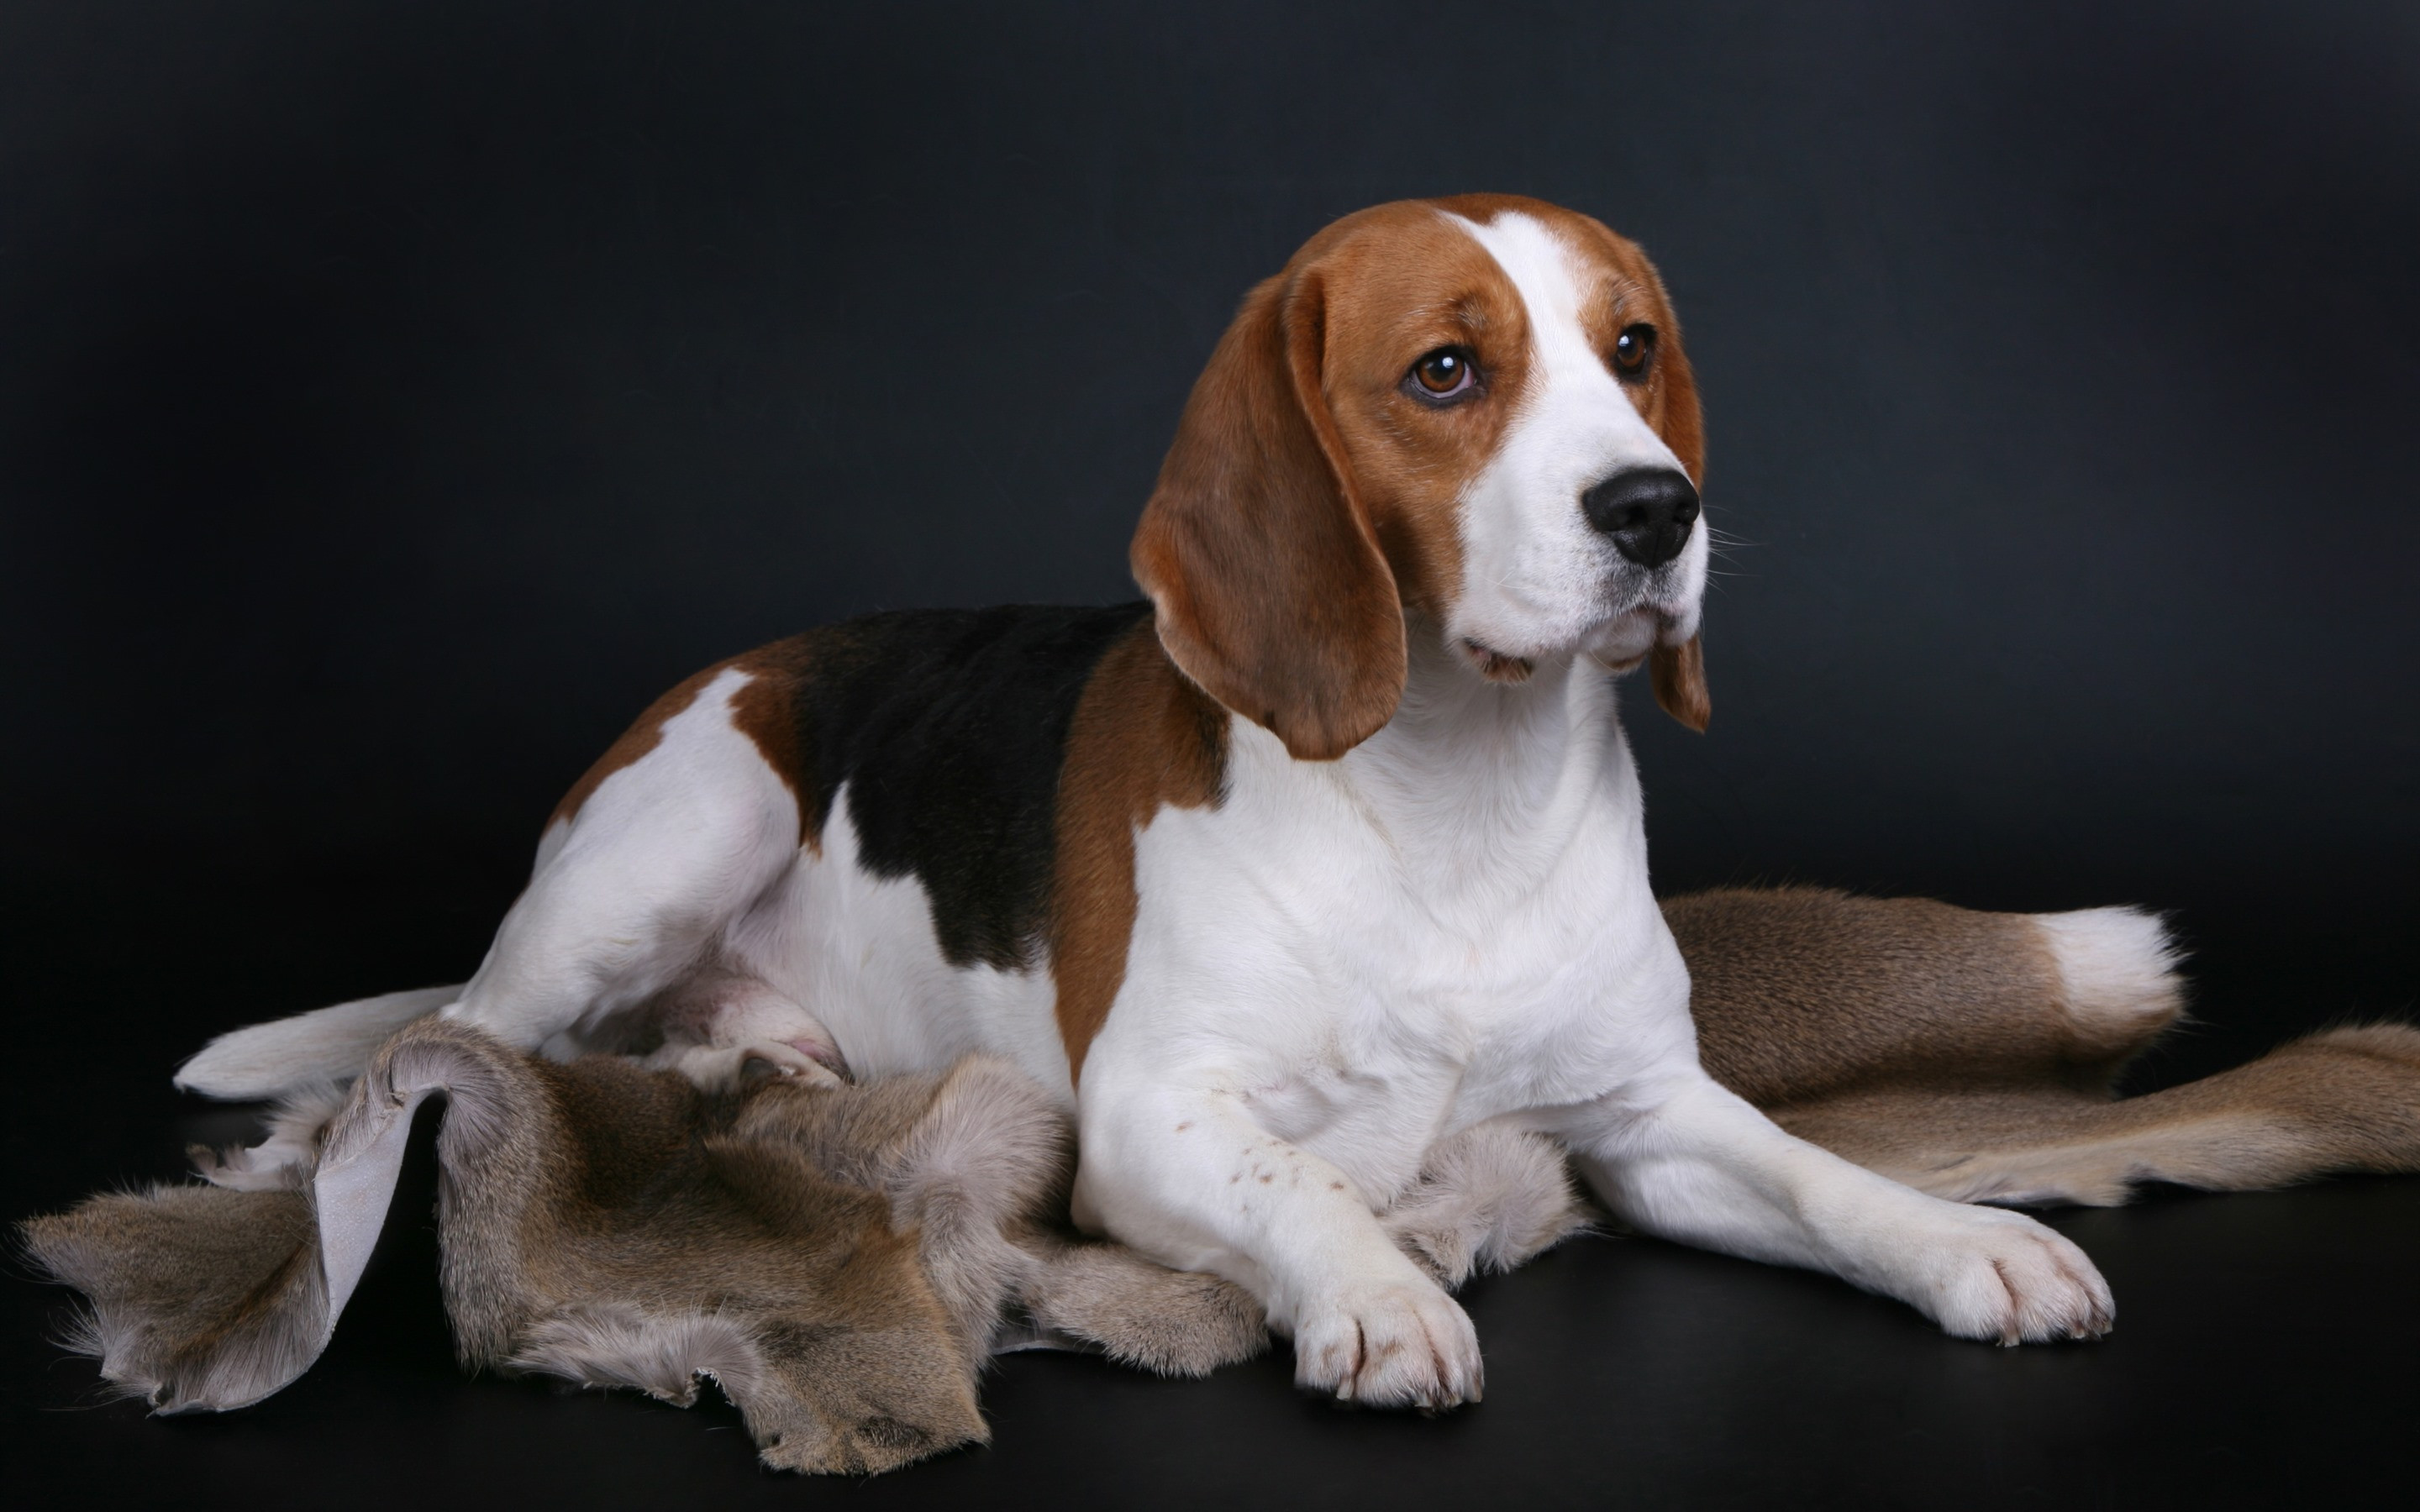 Wallpapers wallpaper beagle browse cute puppy on the desktop